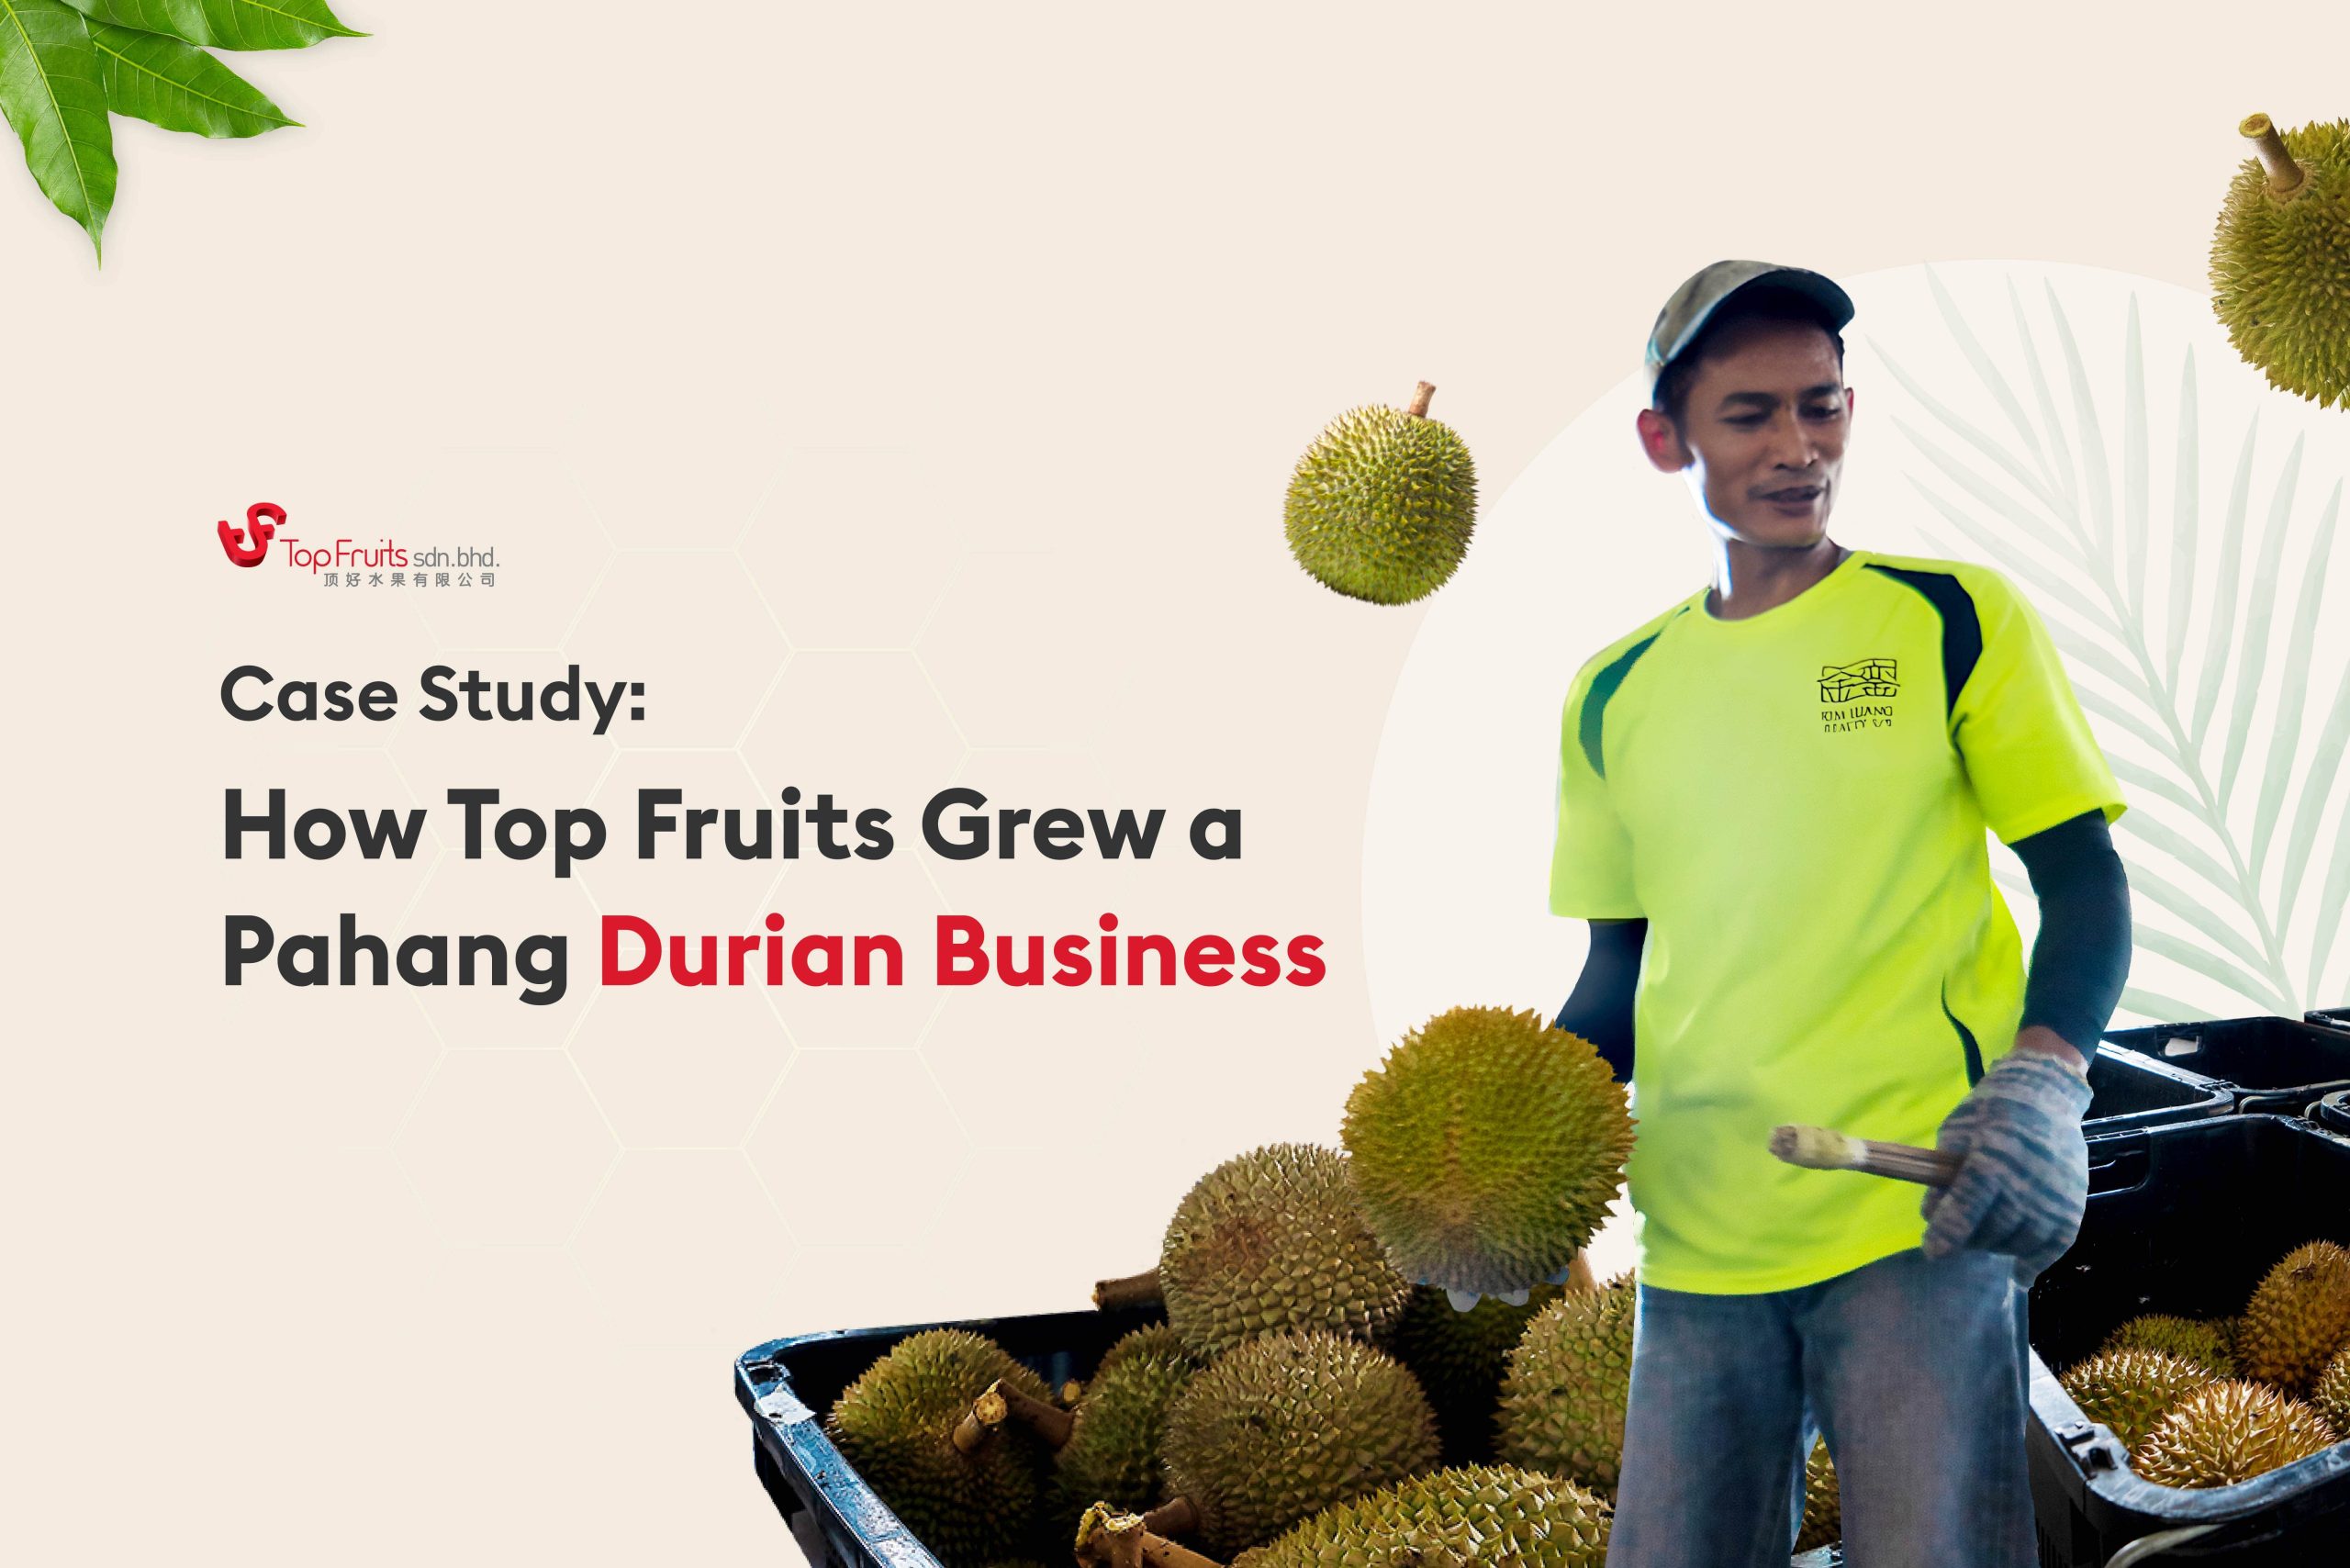 pahang durian consultation services